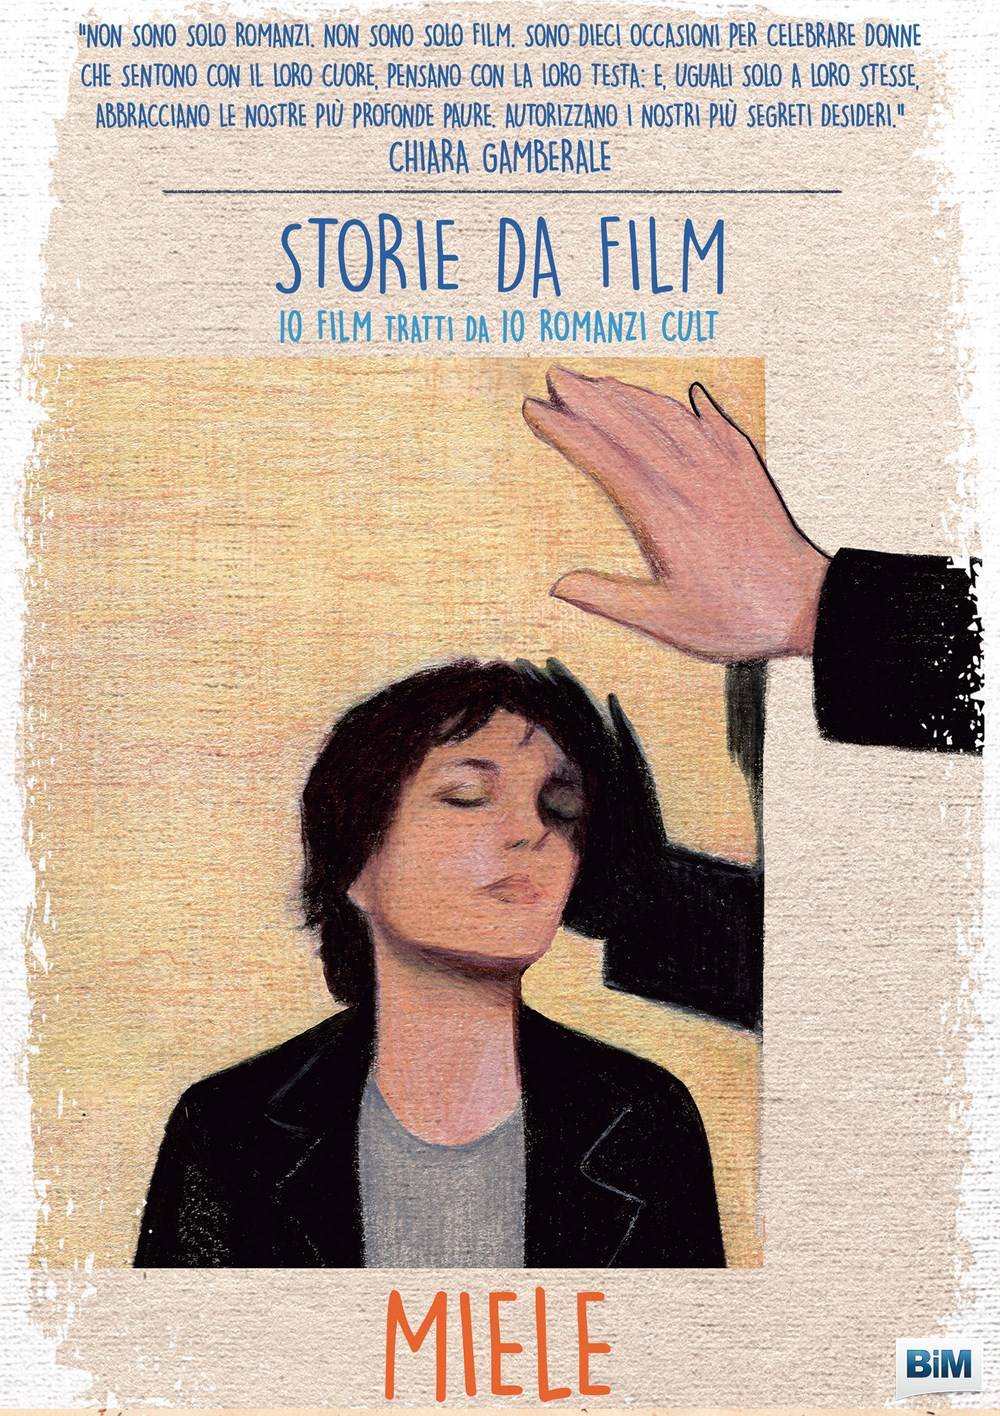 FRONT_STORIE FILM_miele